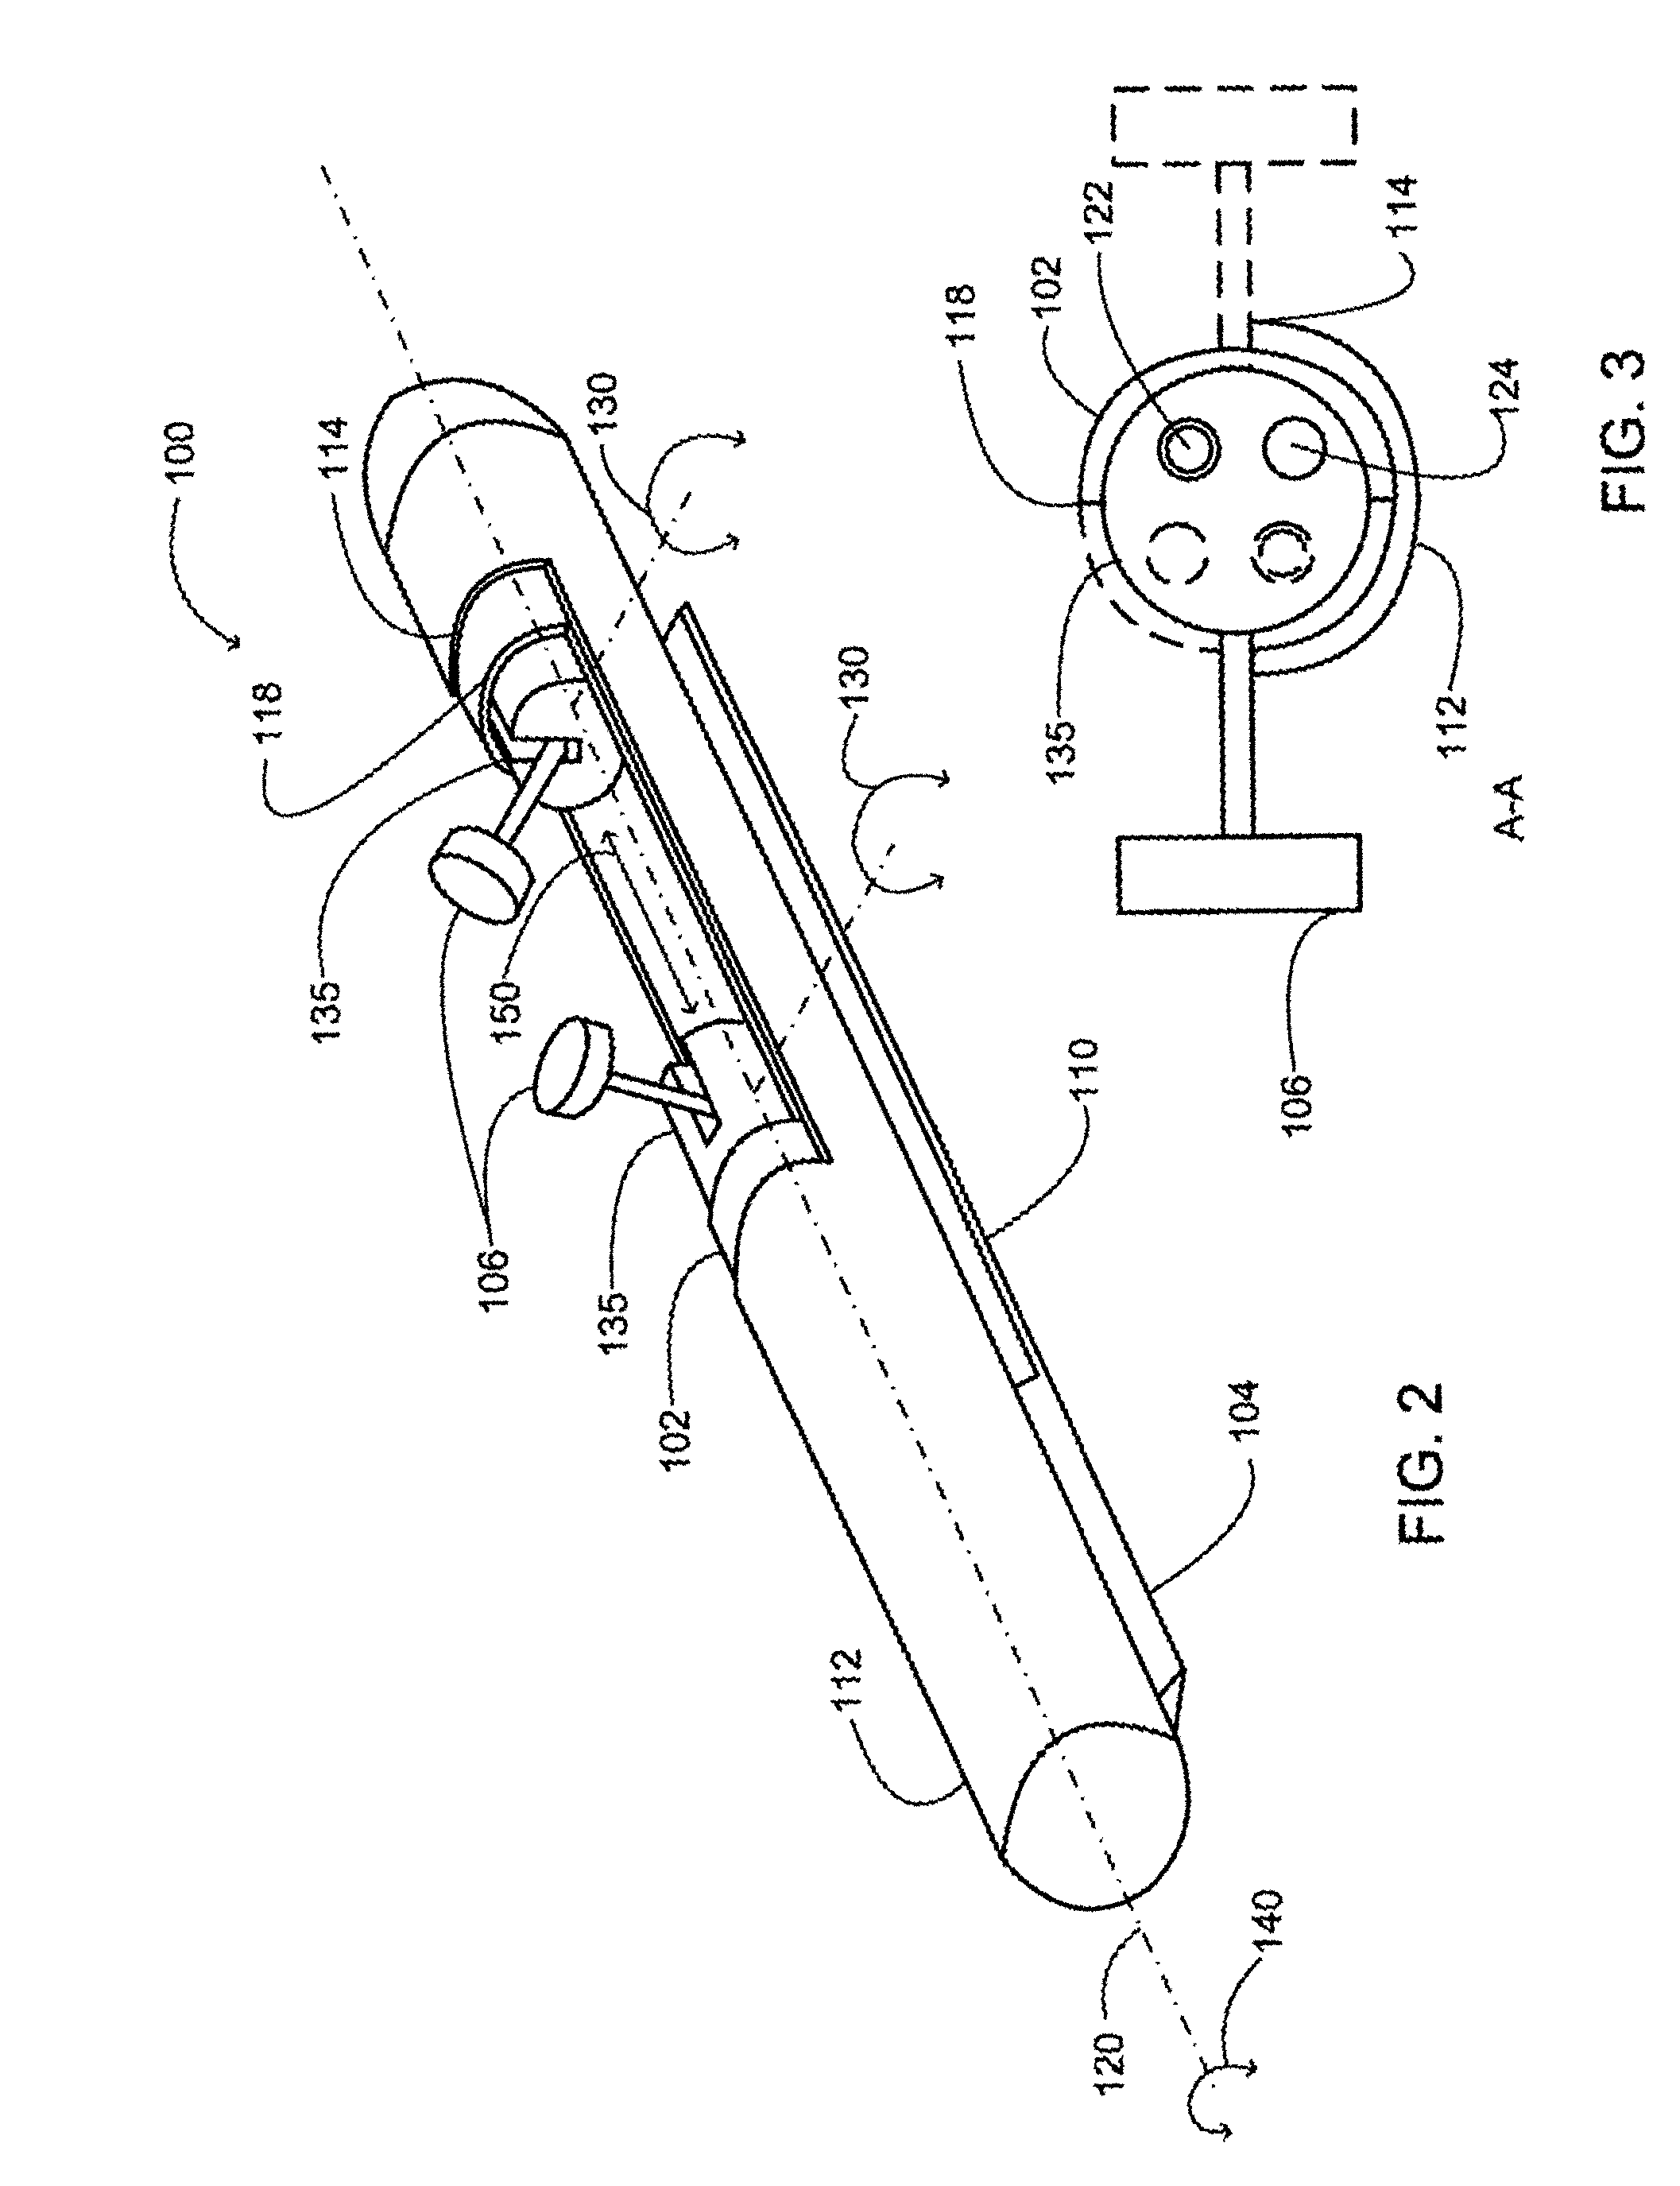 Insertable device and system for minimal access procedure